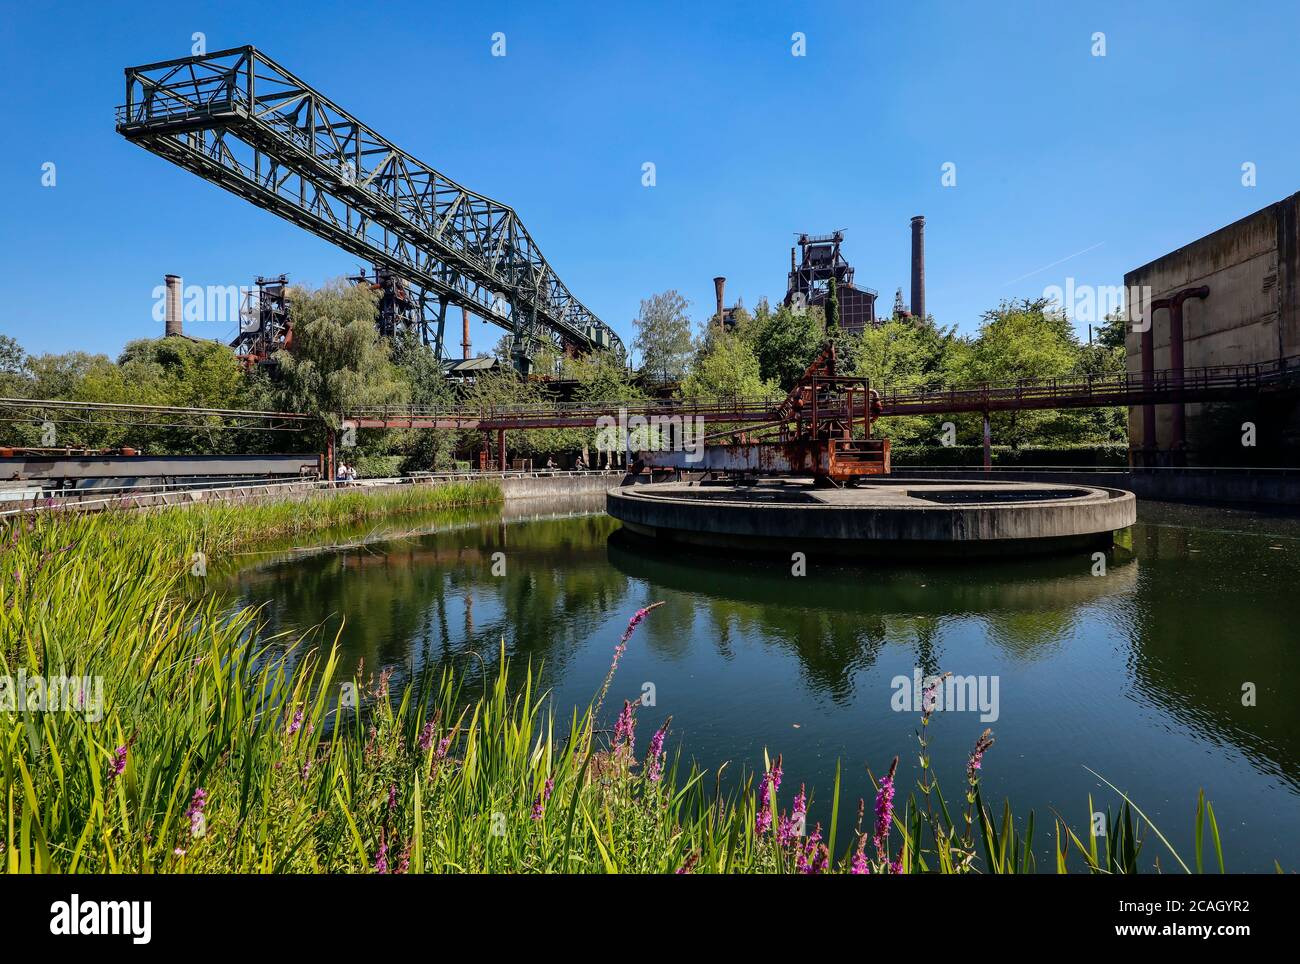 30.07.2020, Duisburg, North Rhine-Westphalia, Germany - Landschaftspark Duisburg-Nord, a landscape park covering about 180 hectares around a disused i Stock Photo